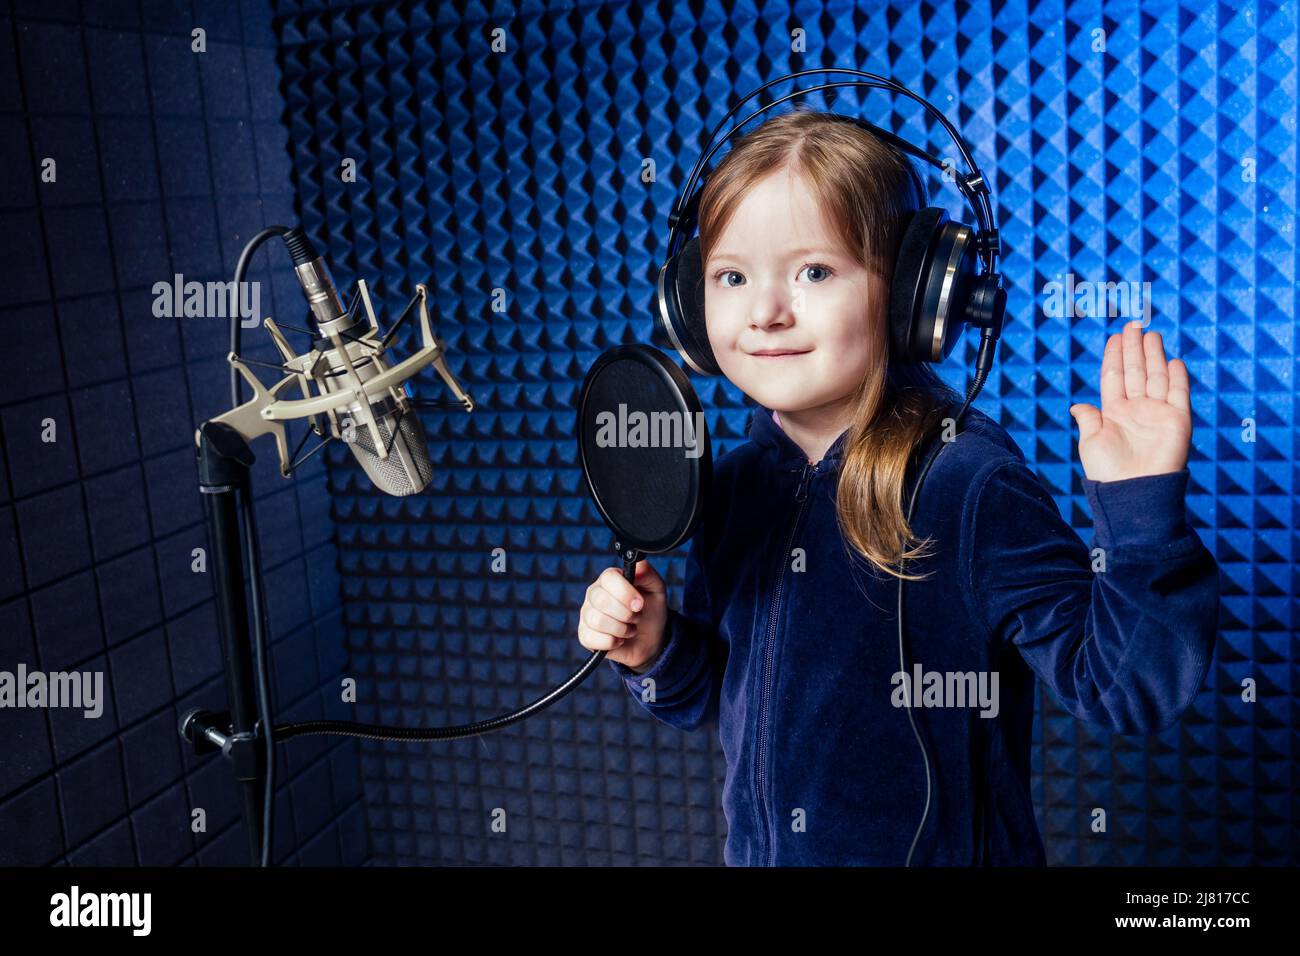 girl star singer artist in a black blouse with headphone recording new song  with microphone Stock Photo - Alamy